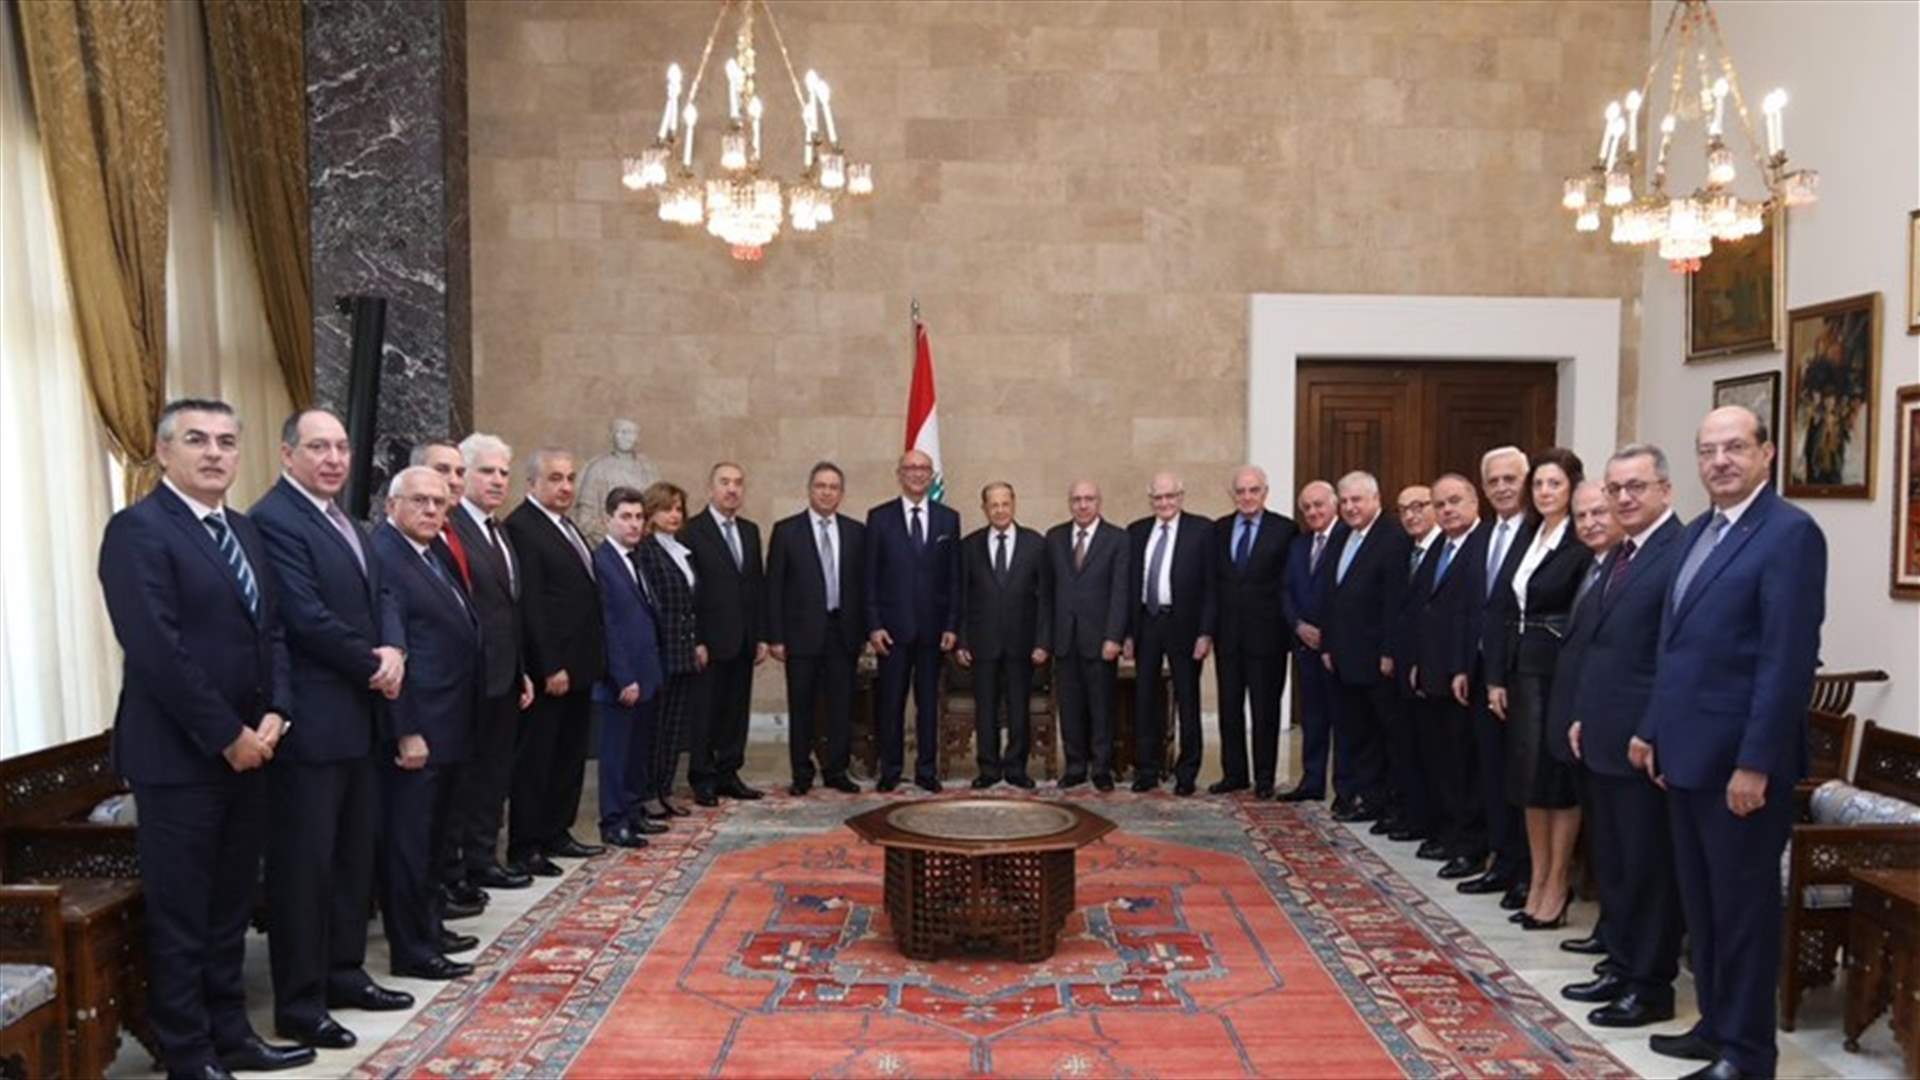 President Aoun says Lebanese people overcame crisis with their national unity